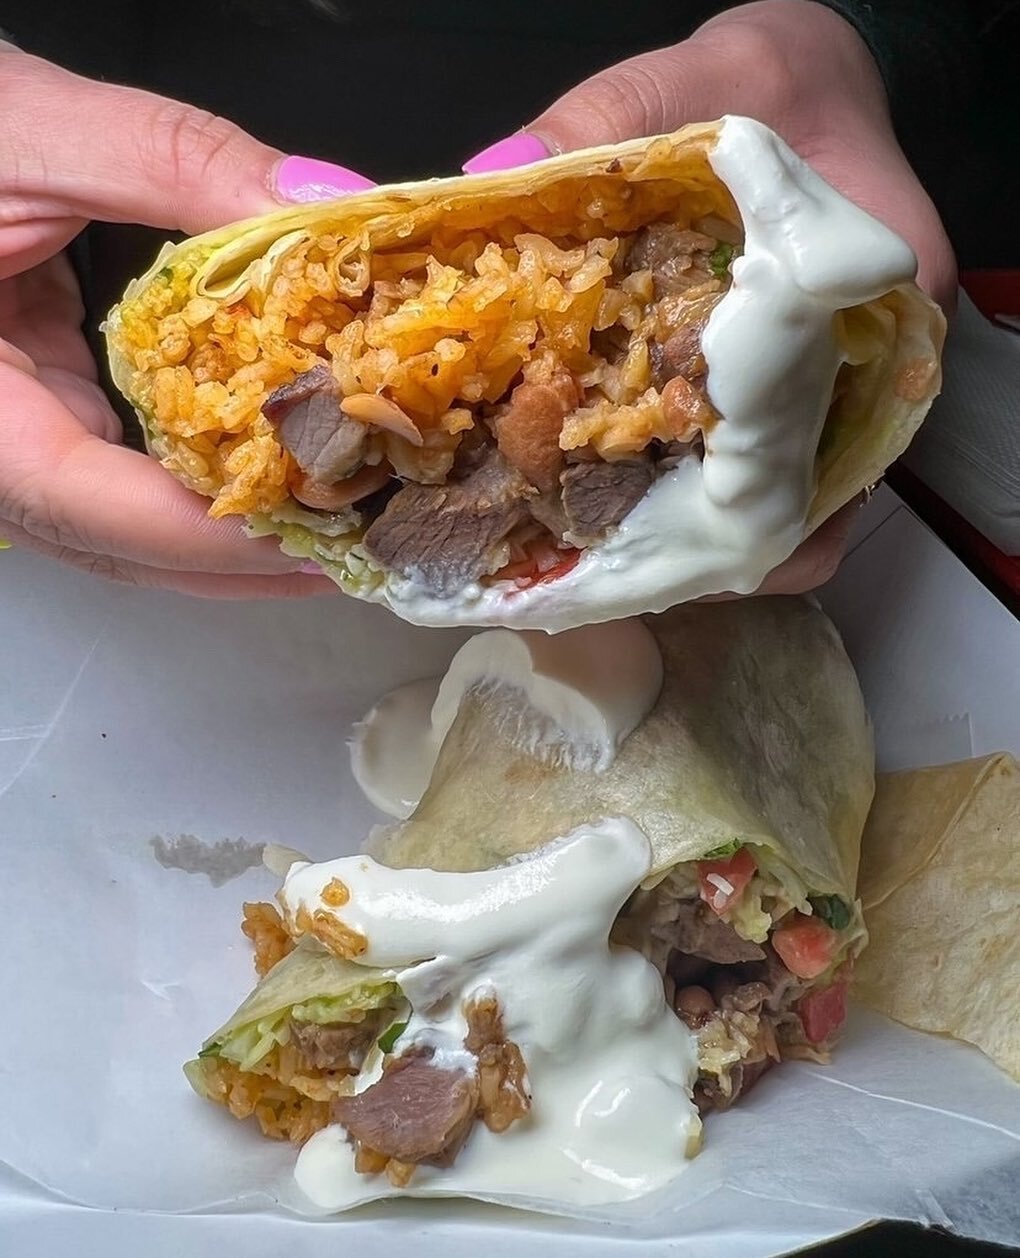 Now this is how we like to start our weekend😍🌯
⁠
📷: @mandyeatsny